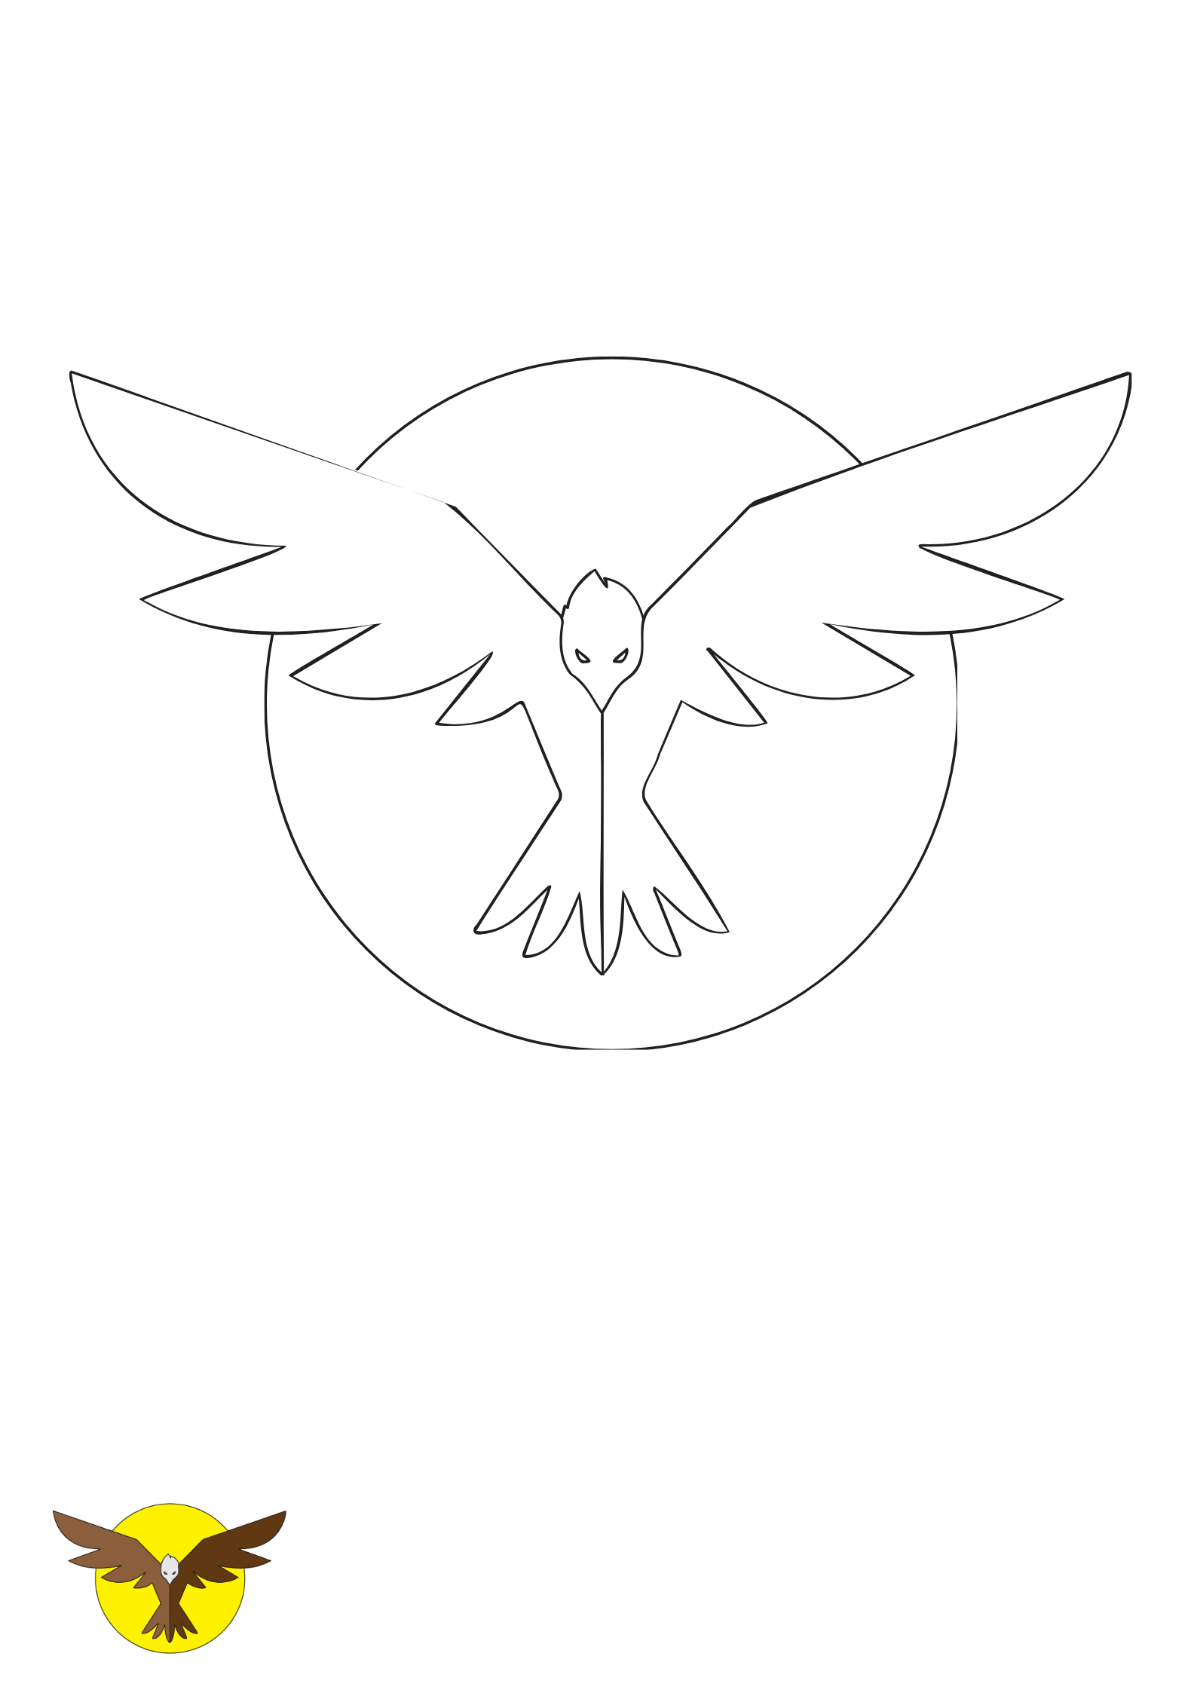 Abstract Eagle coloring page Template